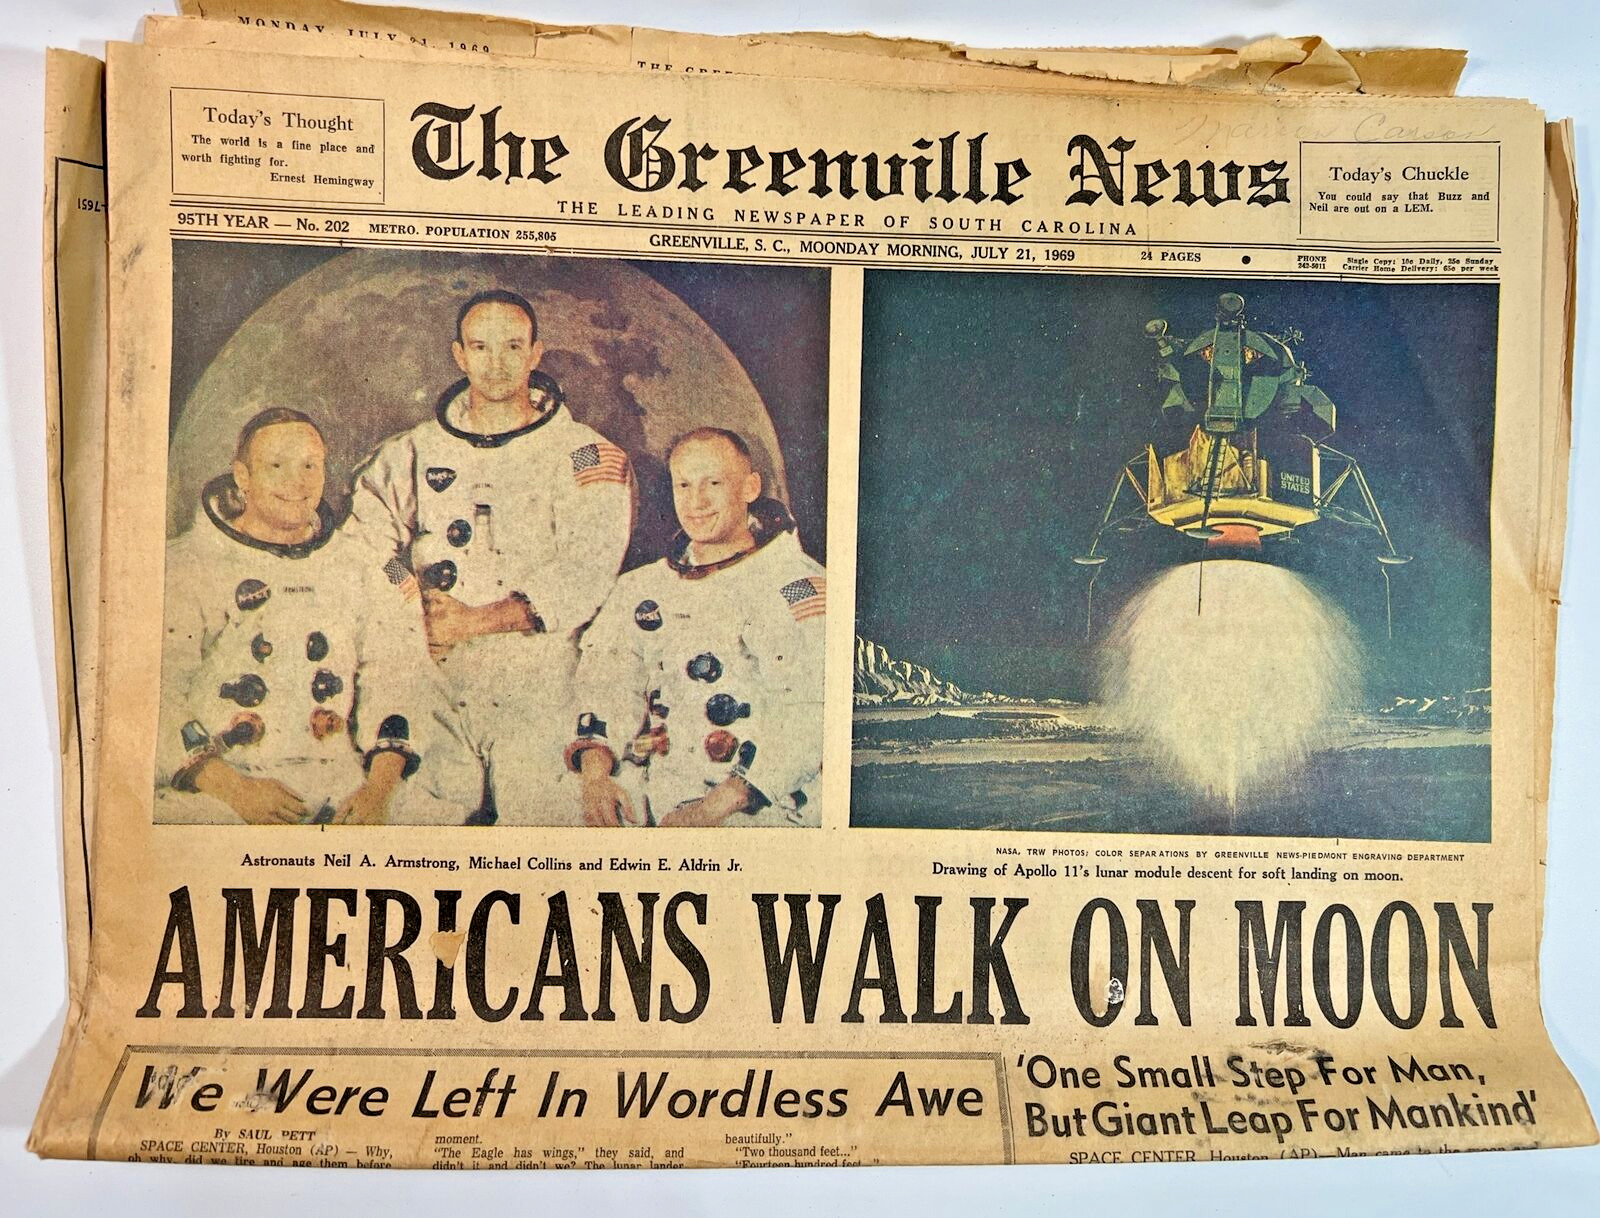 Vintage The Greenville News Newspaper Americans Walk On Moon & Ads July 21, 1969